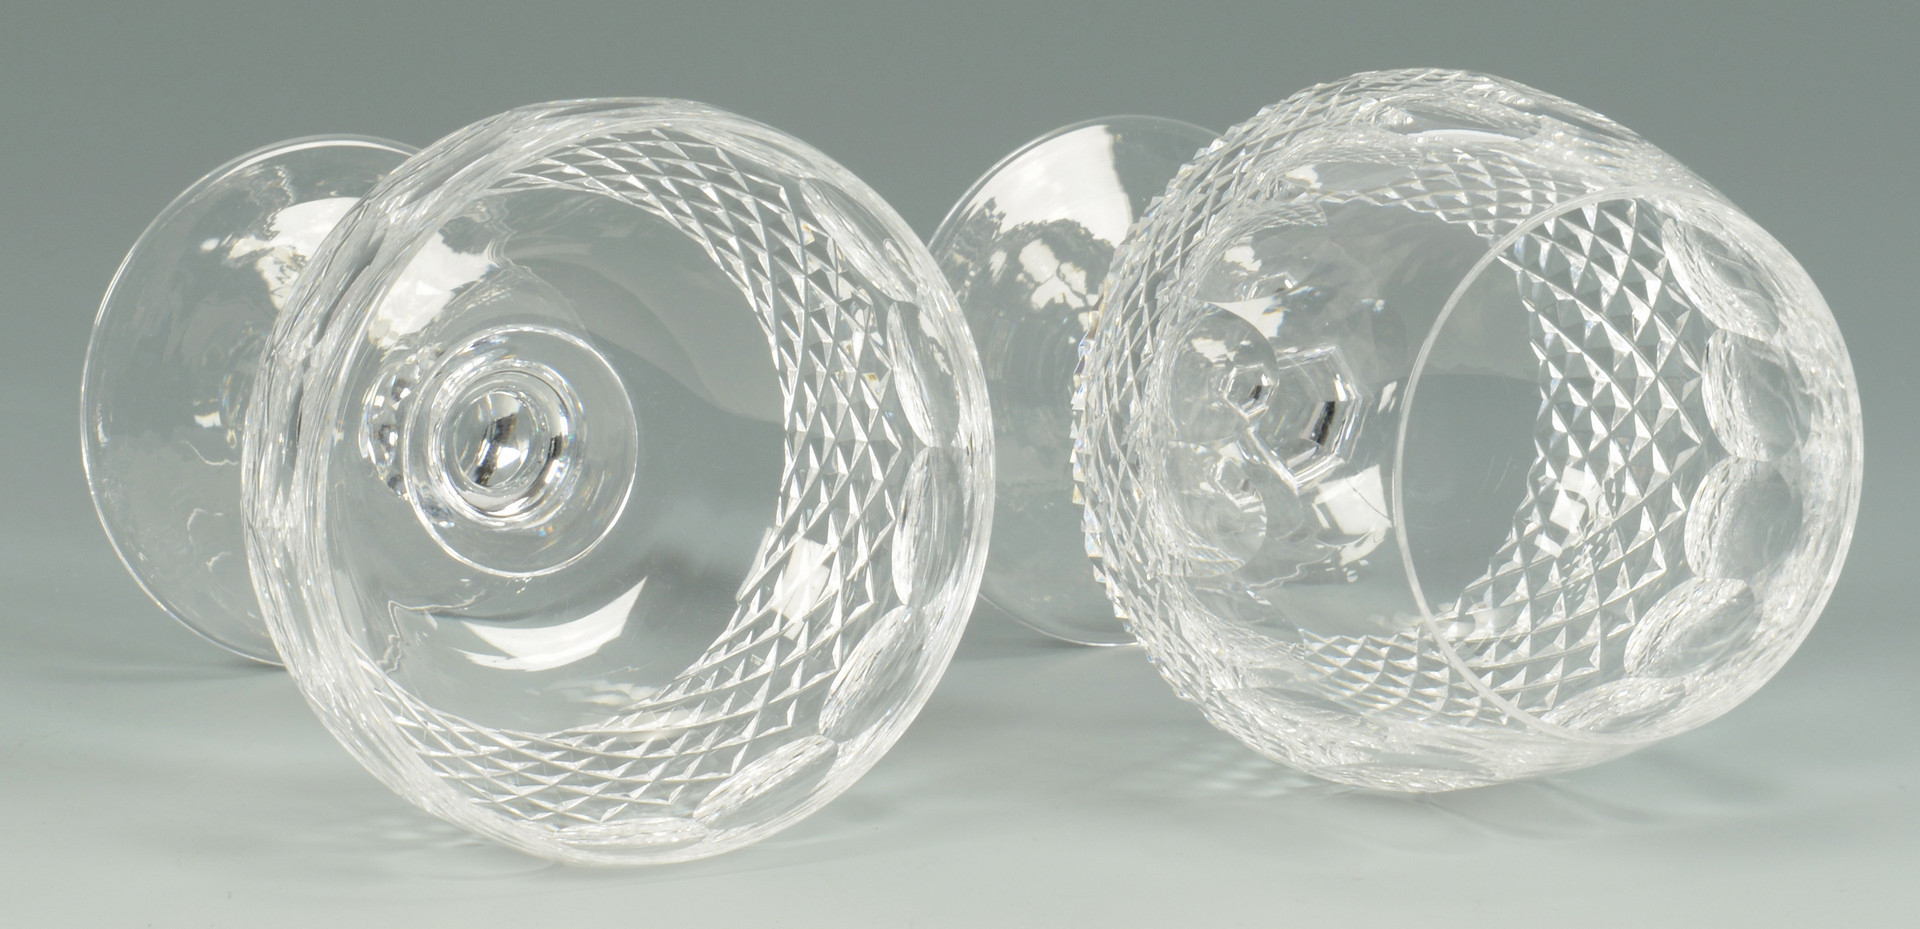 Lot 552: 40 Waterford Crystal "Colleen" Pattern Glasses